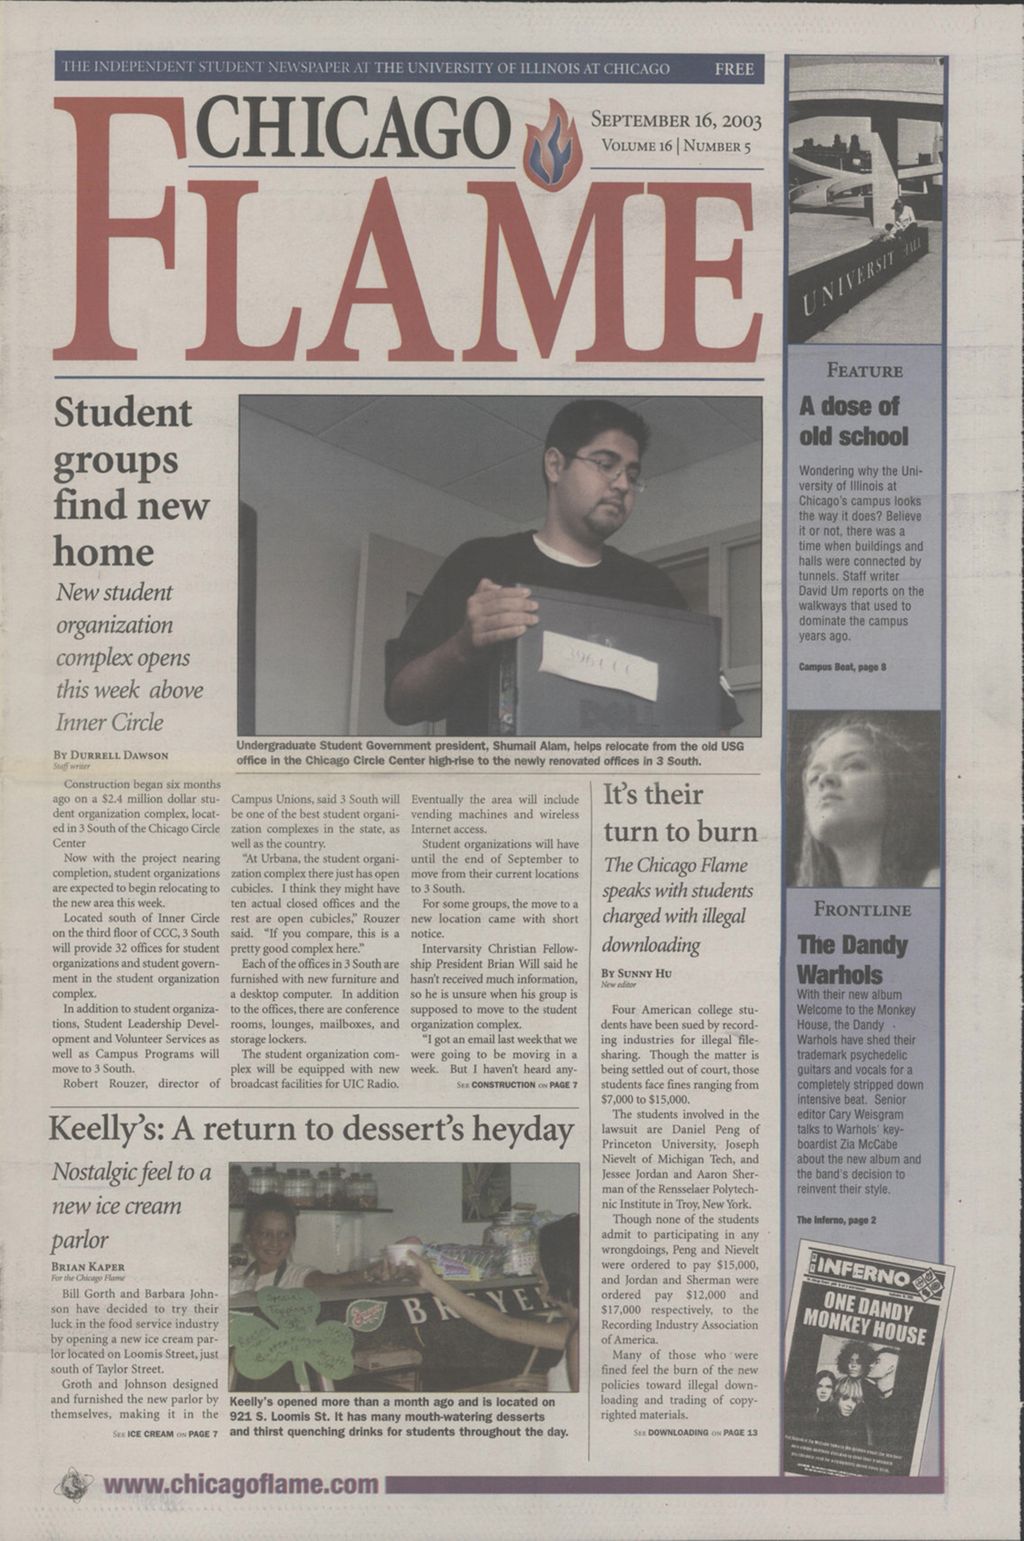 Miniature of Chicago Flame (September 16, 2003)